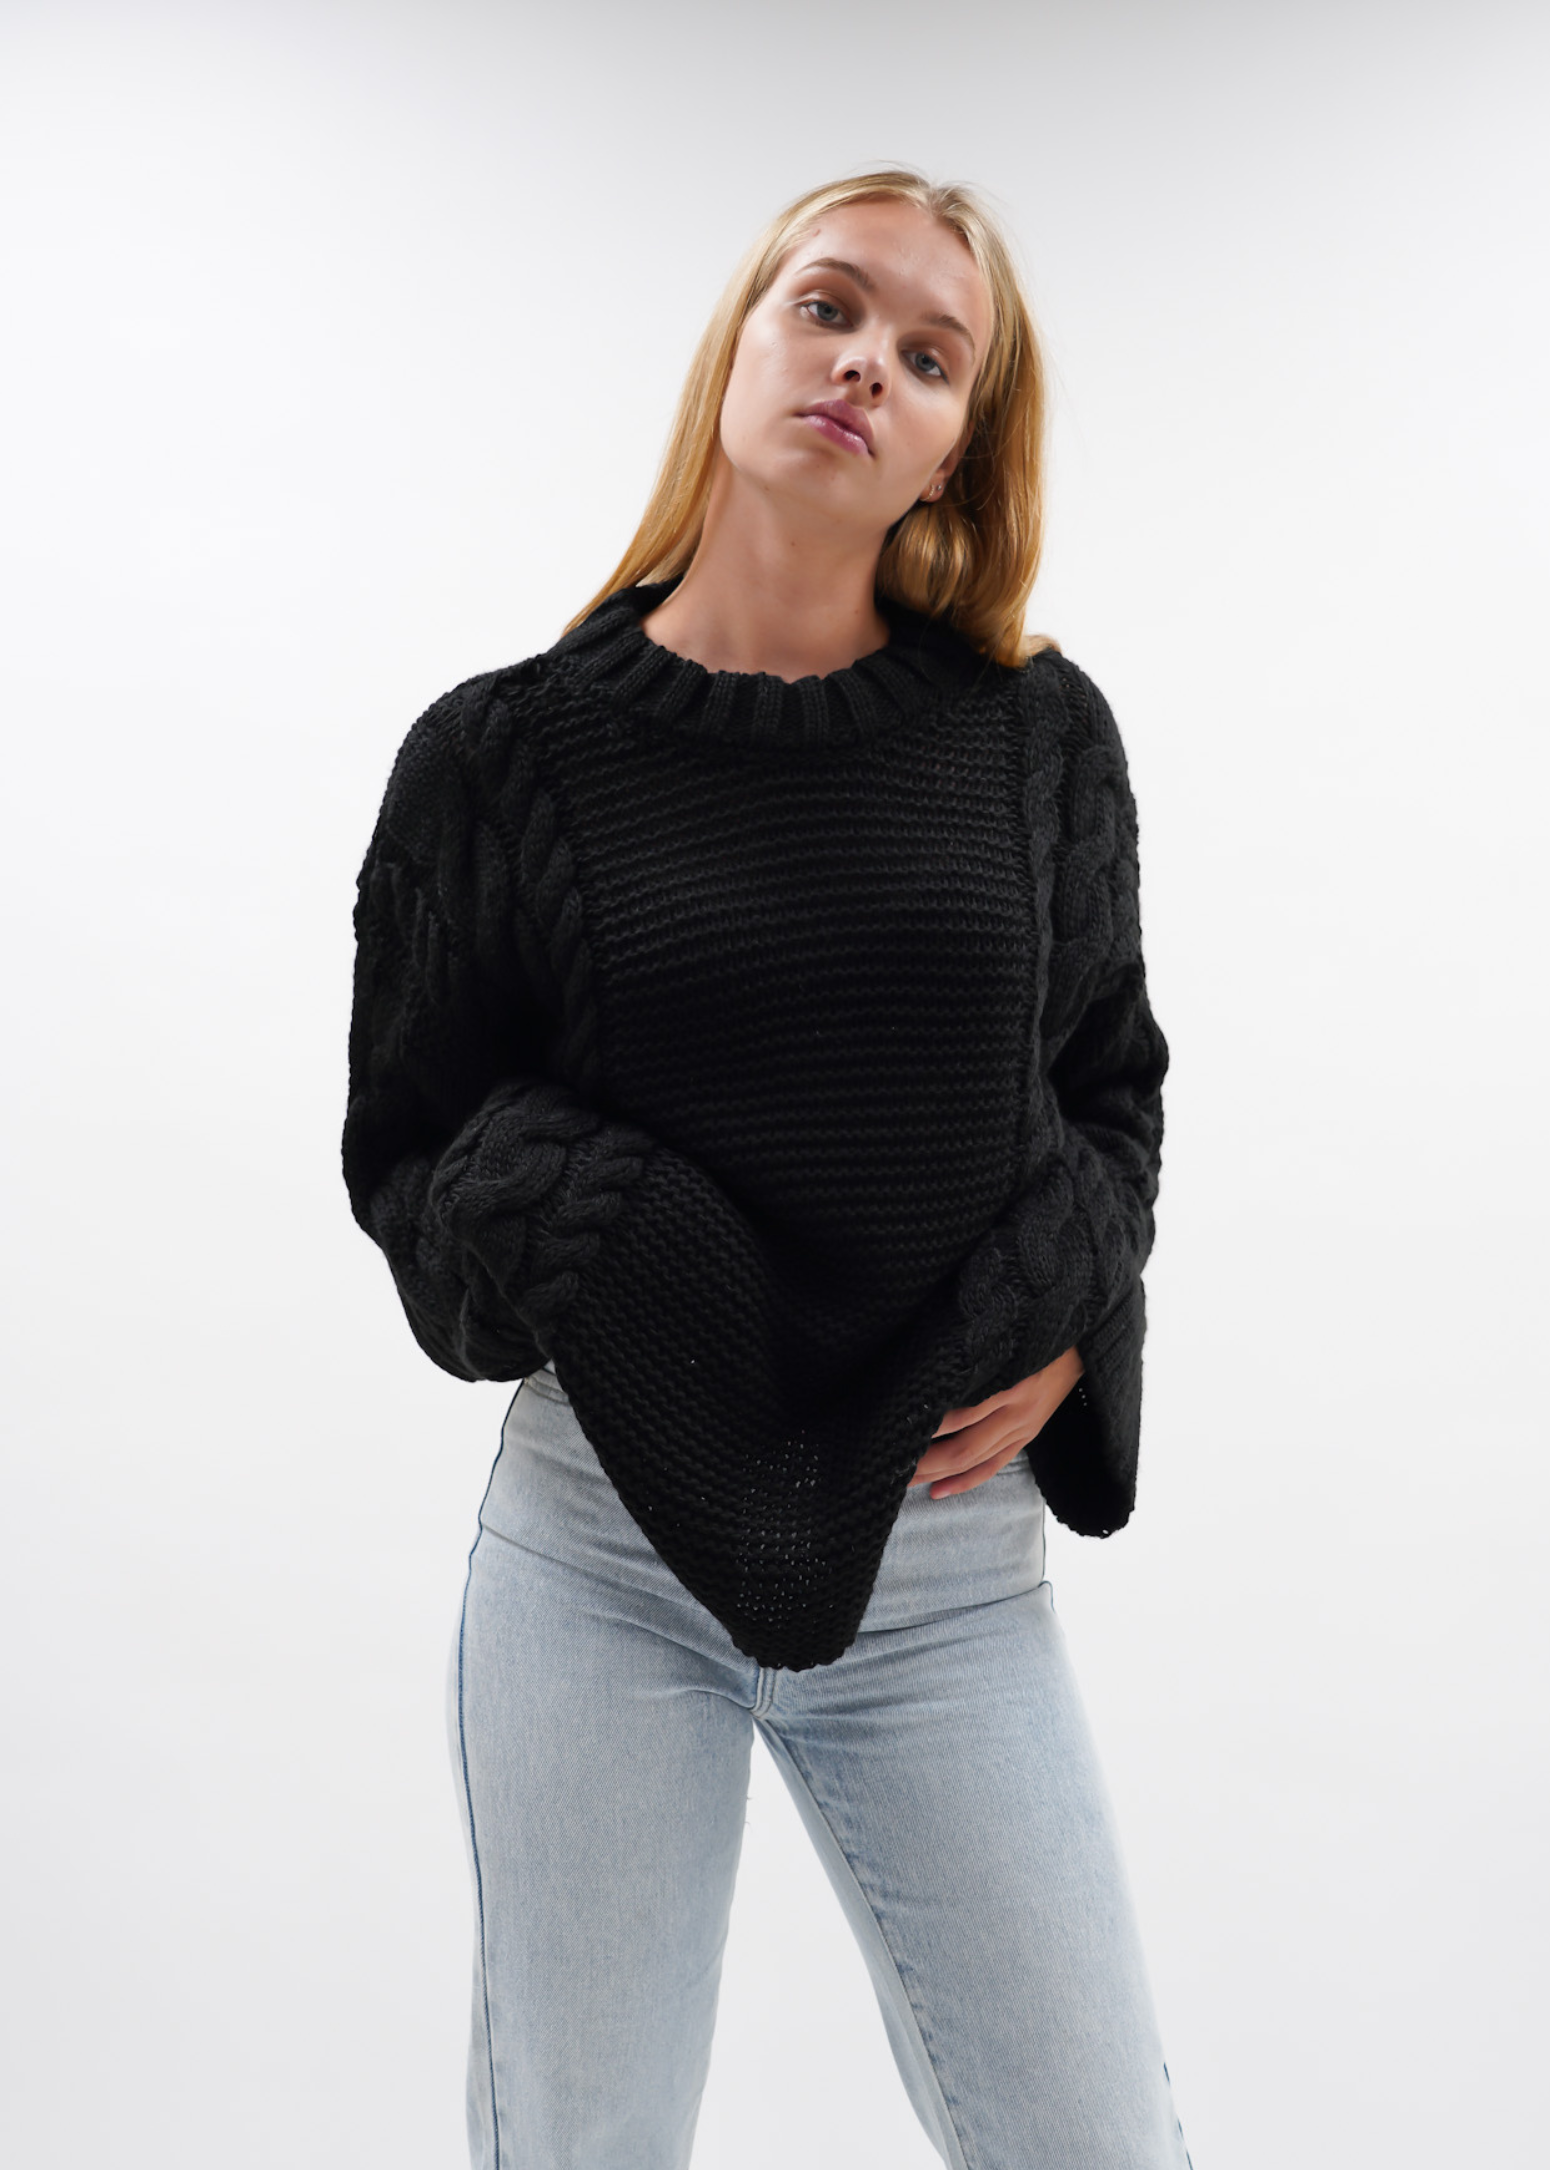 Cable knit black